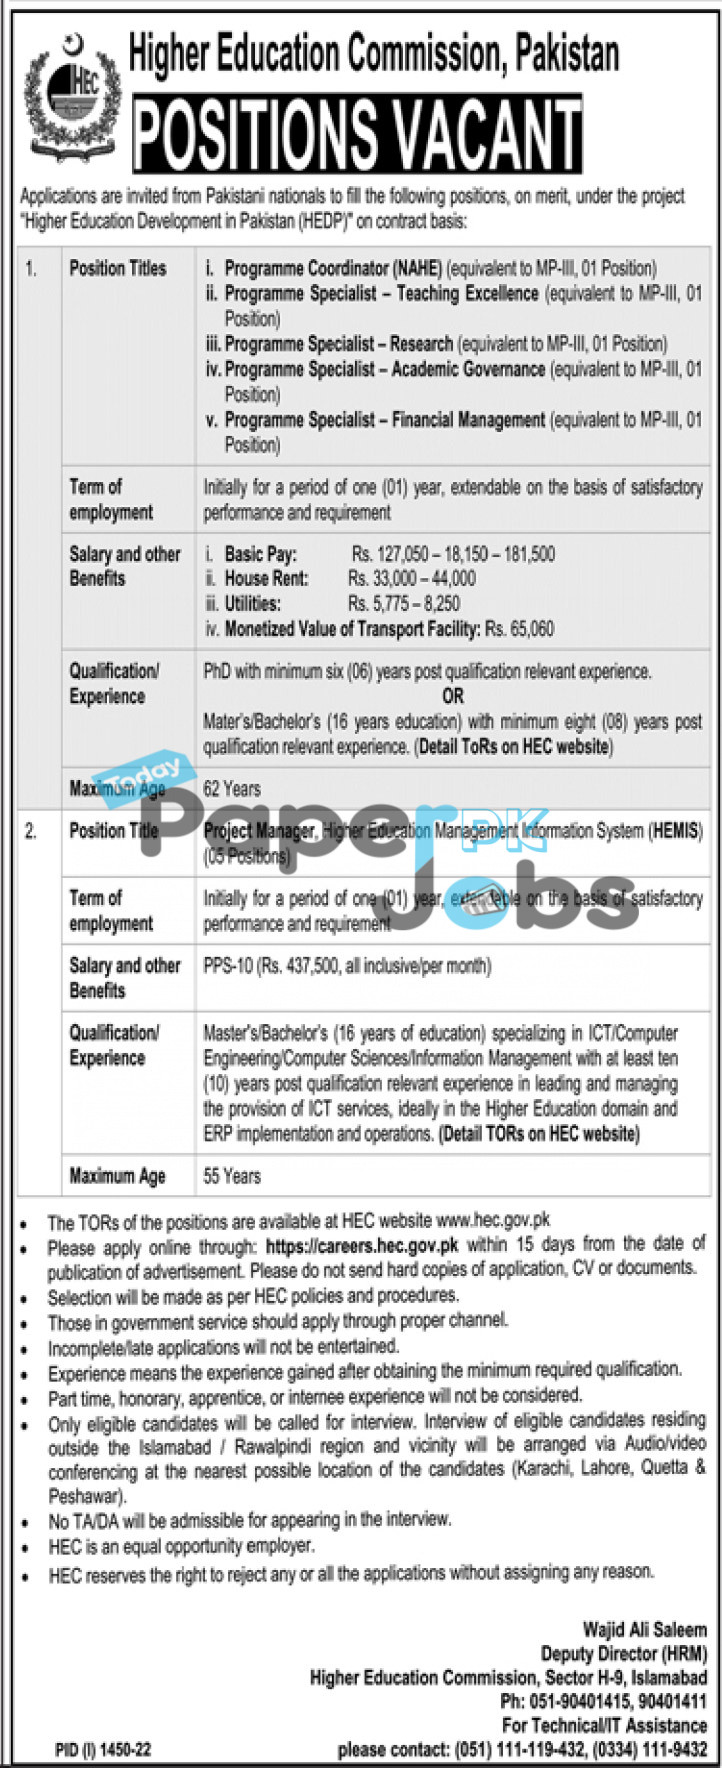 Today New Jobs in Pakistan Job 2022- HEC Higher Education Commission Careers